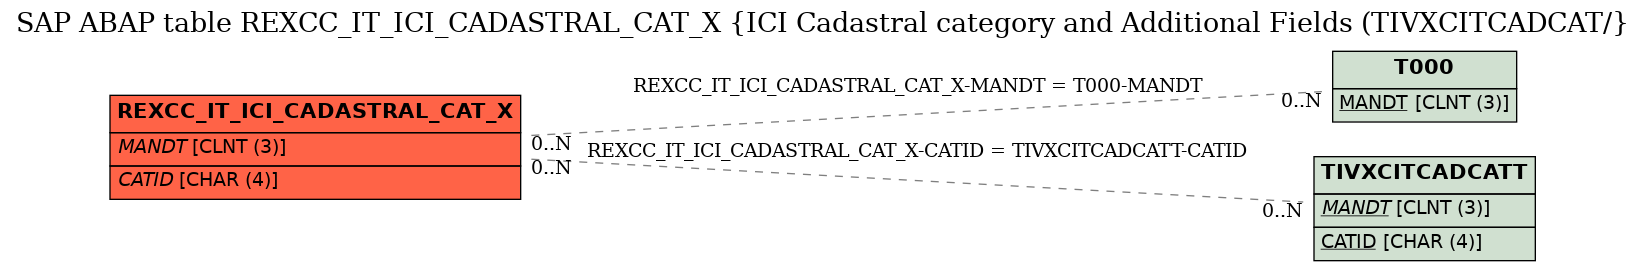 E-R Diagram for table REXCC_IT_ICI_CADASTRAL_CAT_X (ICI Cadastral category and Additional Fields (TIVXCITCADCAT/)